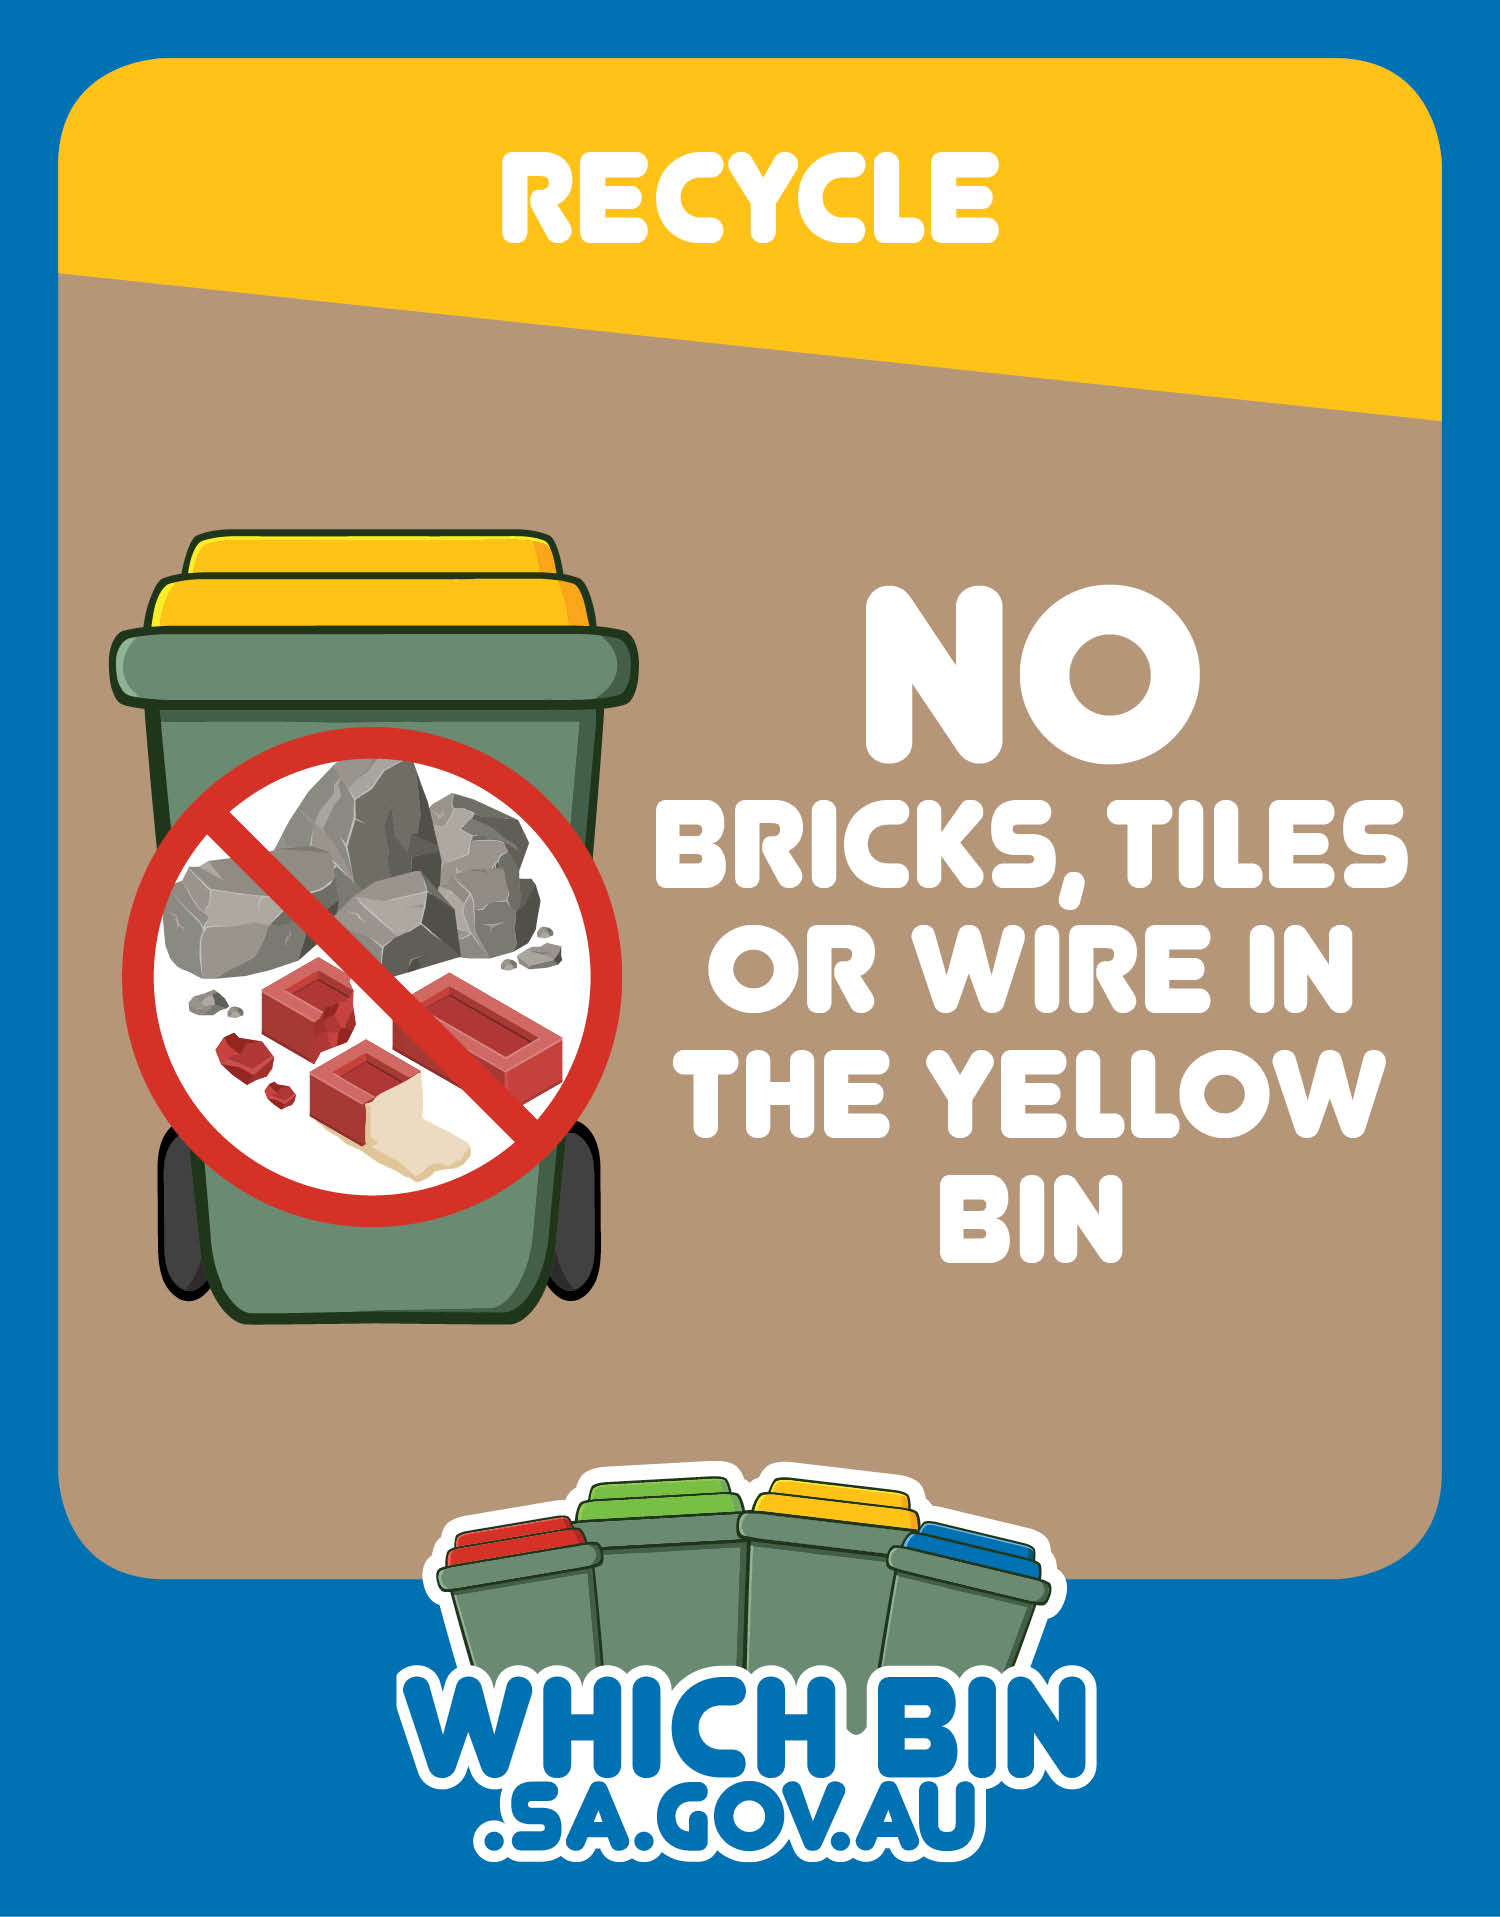 Building materials cannot be recycled in your recycle bin.